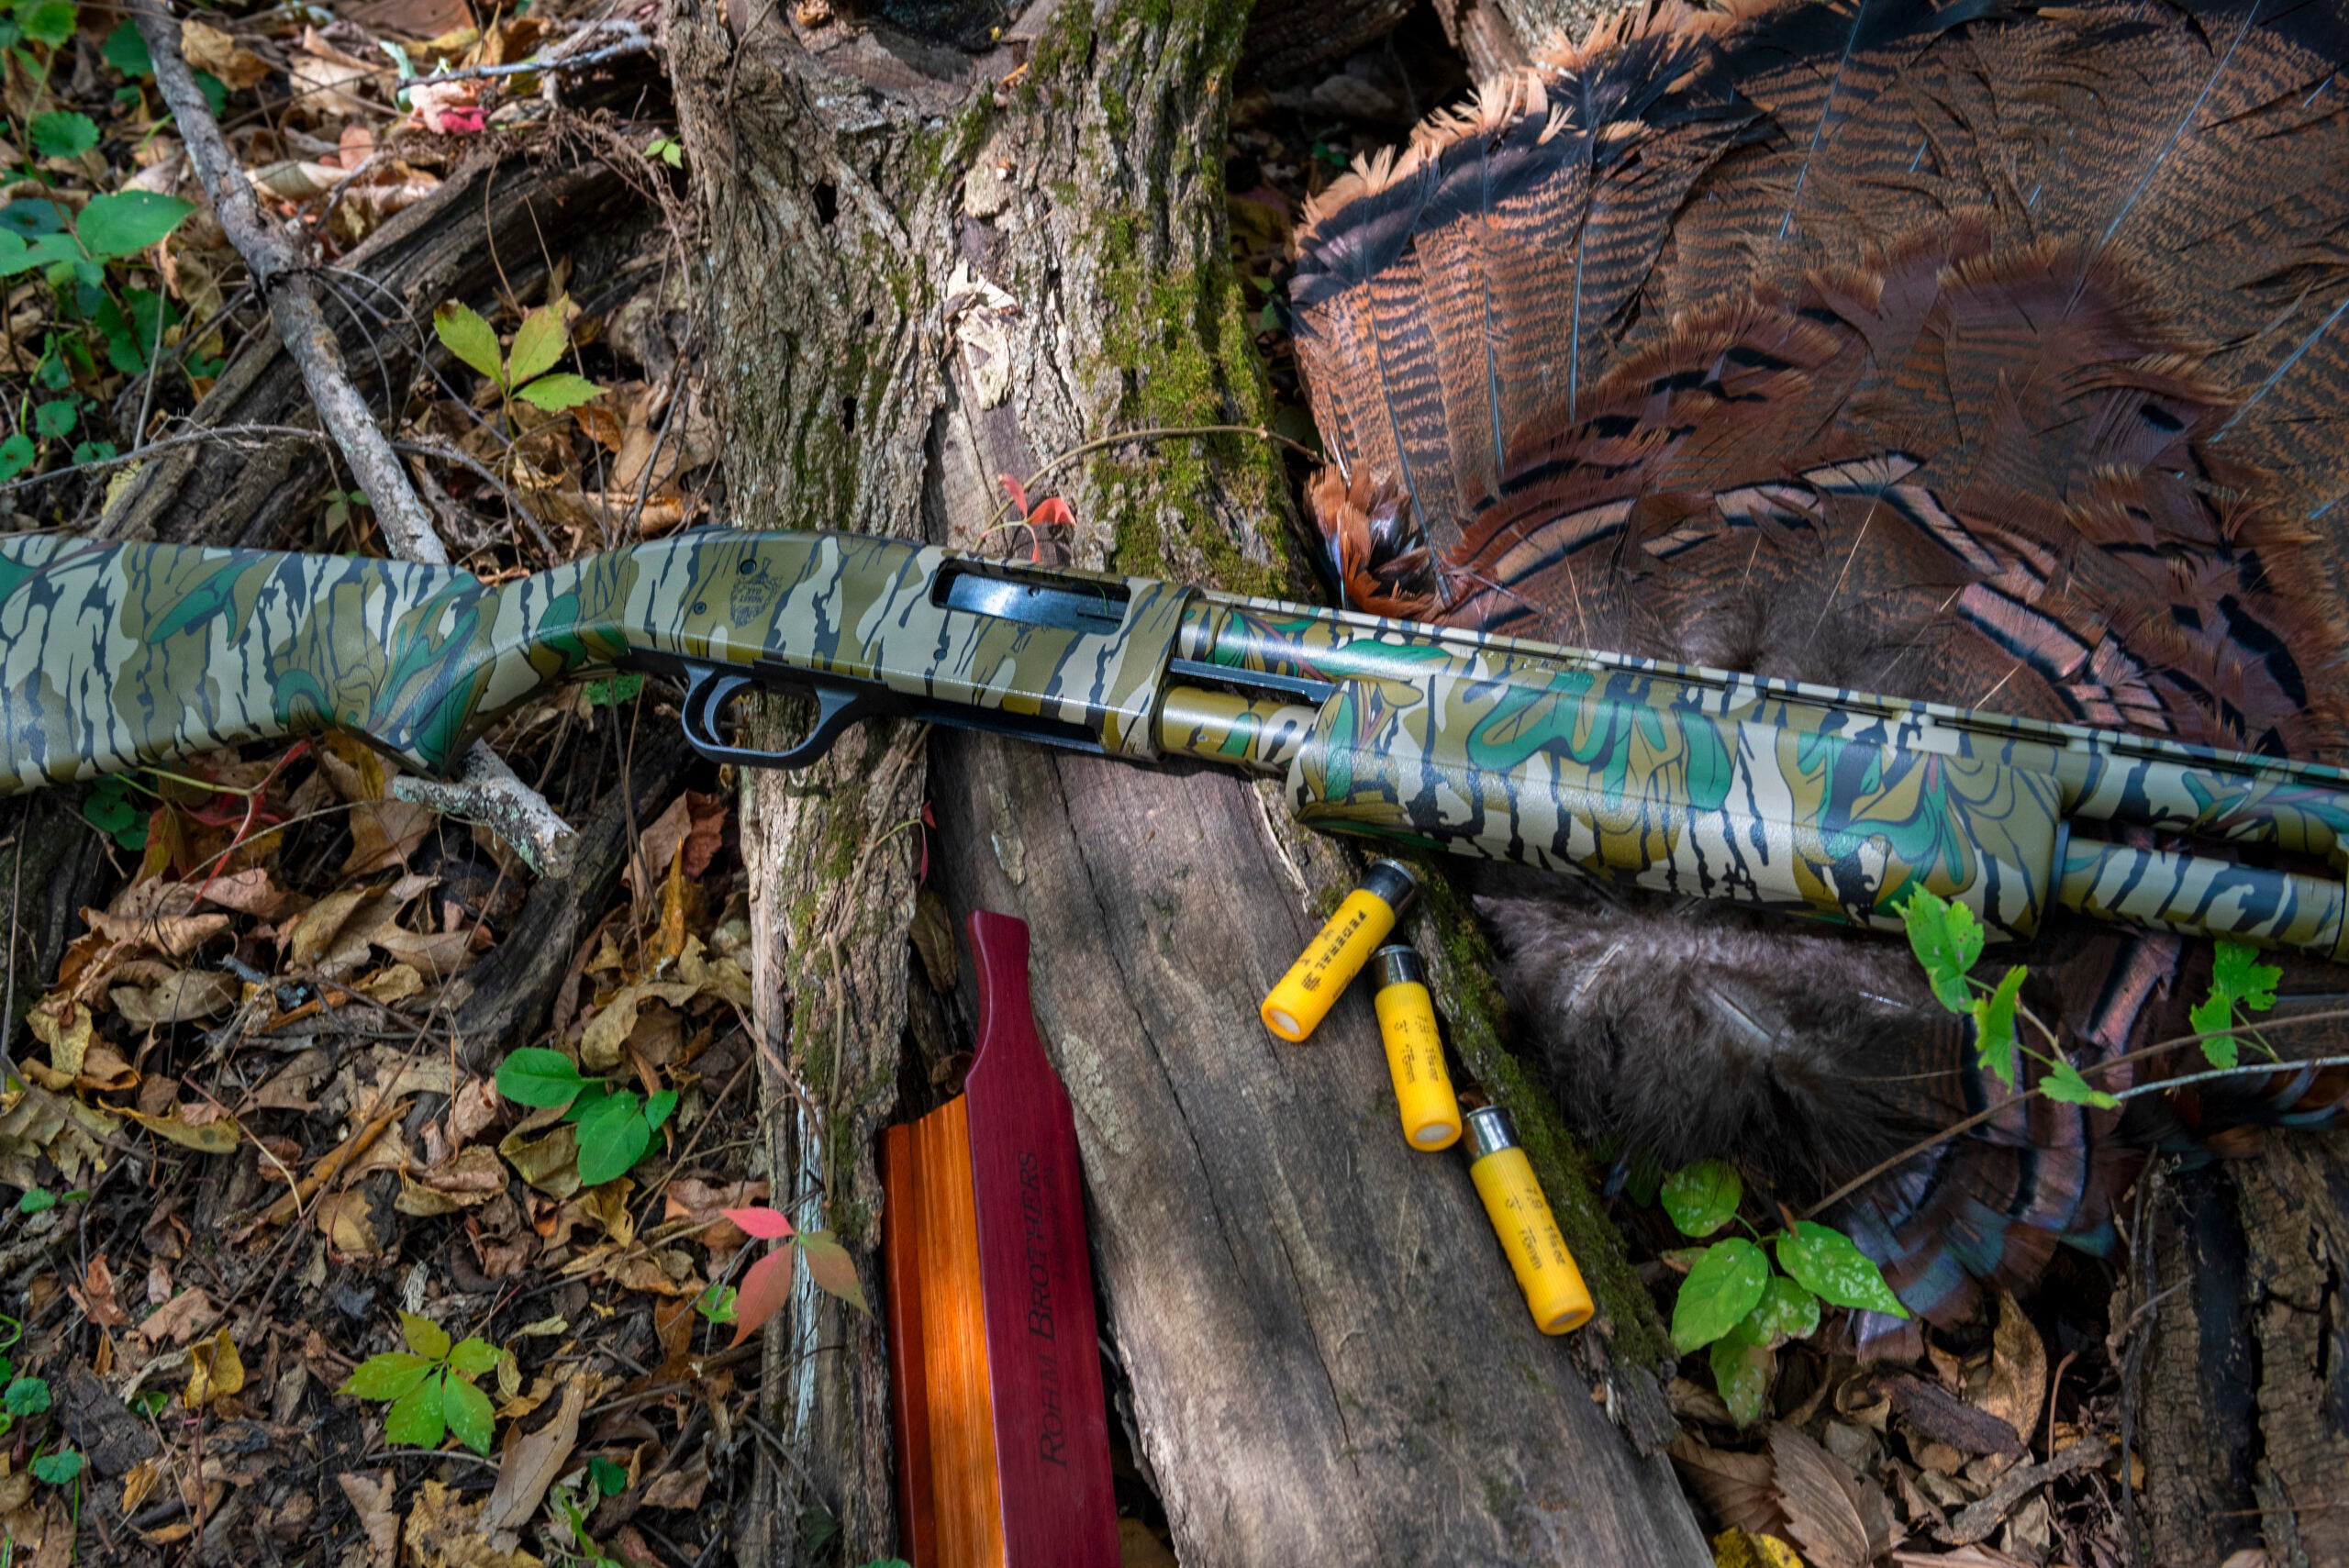 Closeup of the action of Mossberg's new Model 500 20 gauge with shells, box call, and turkey fan